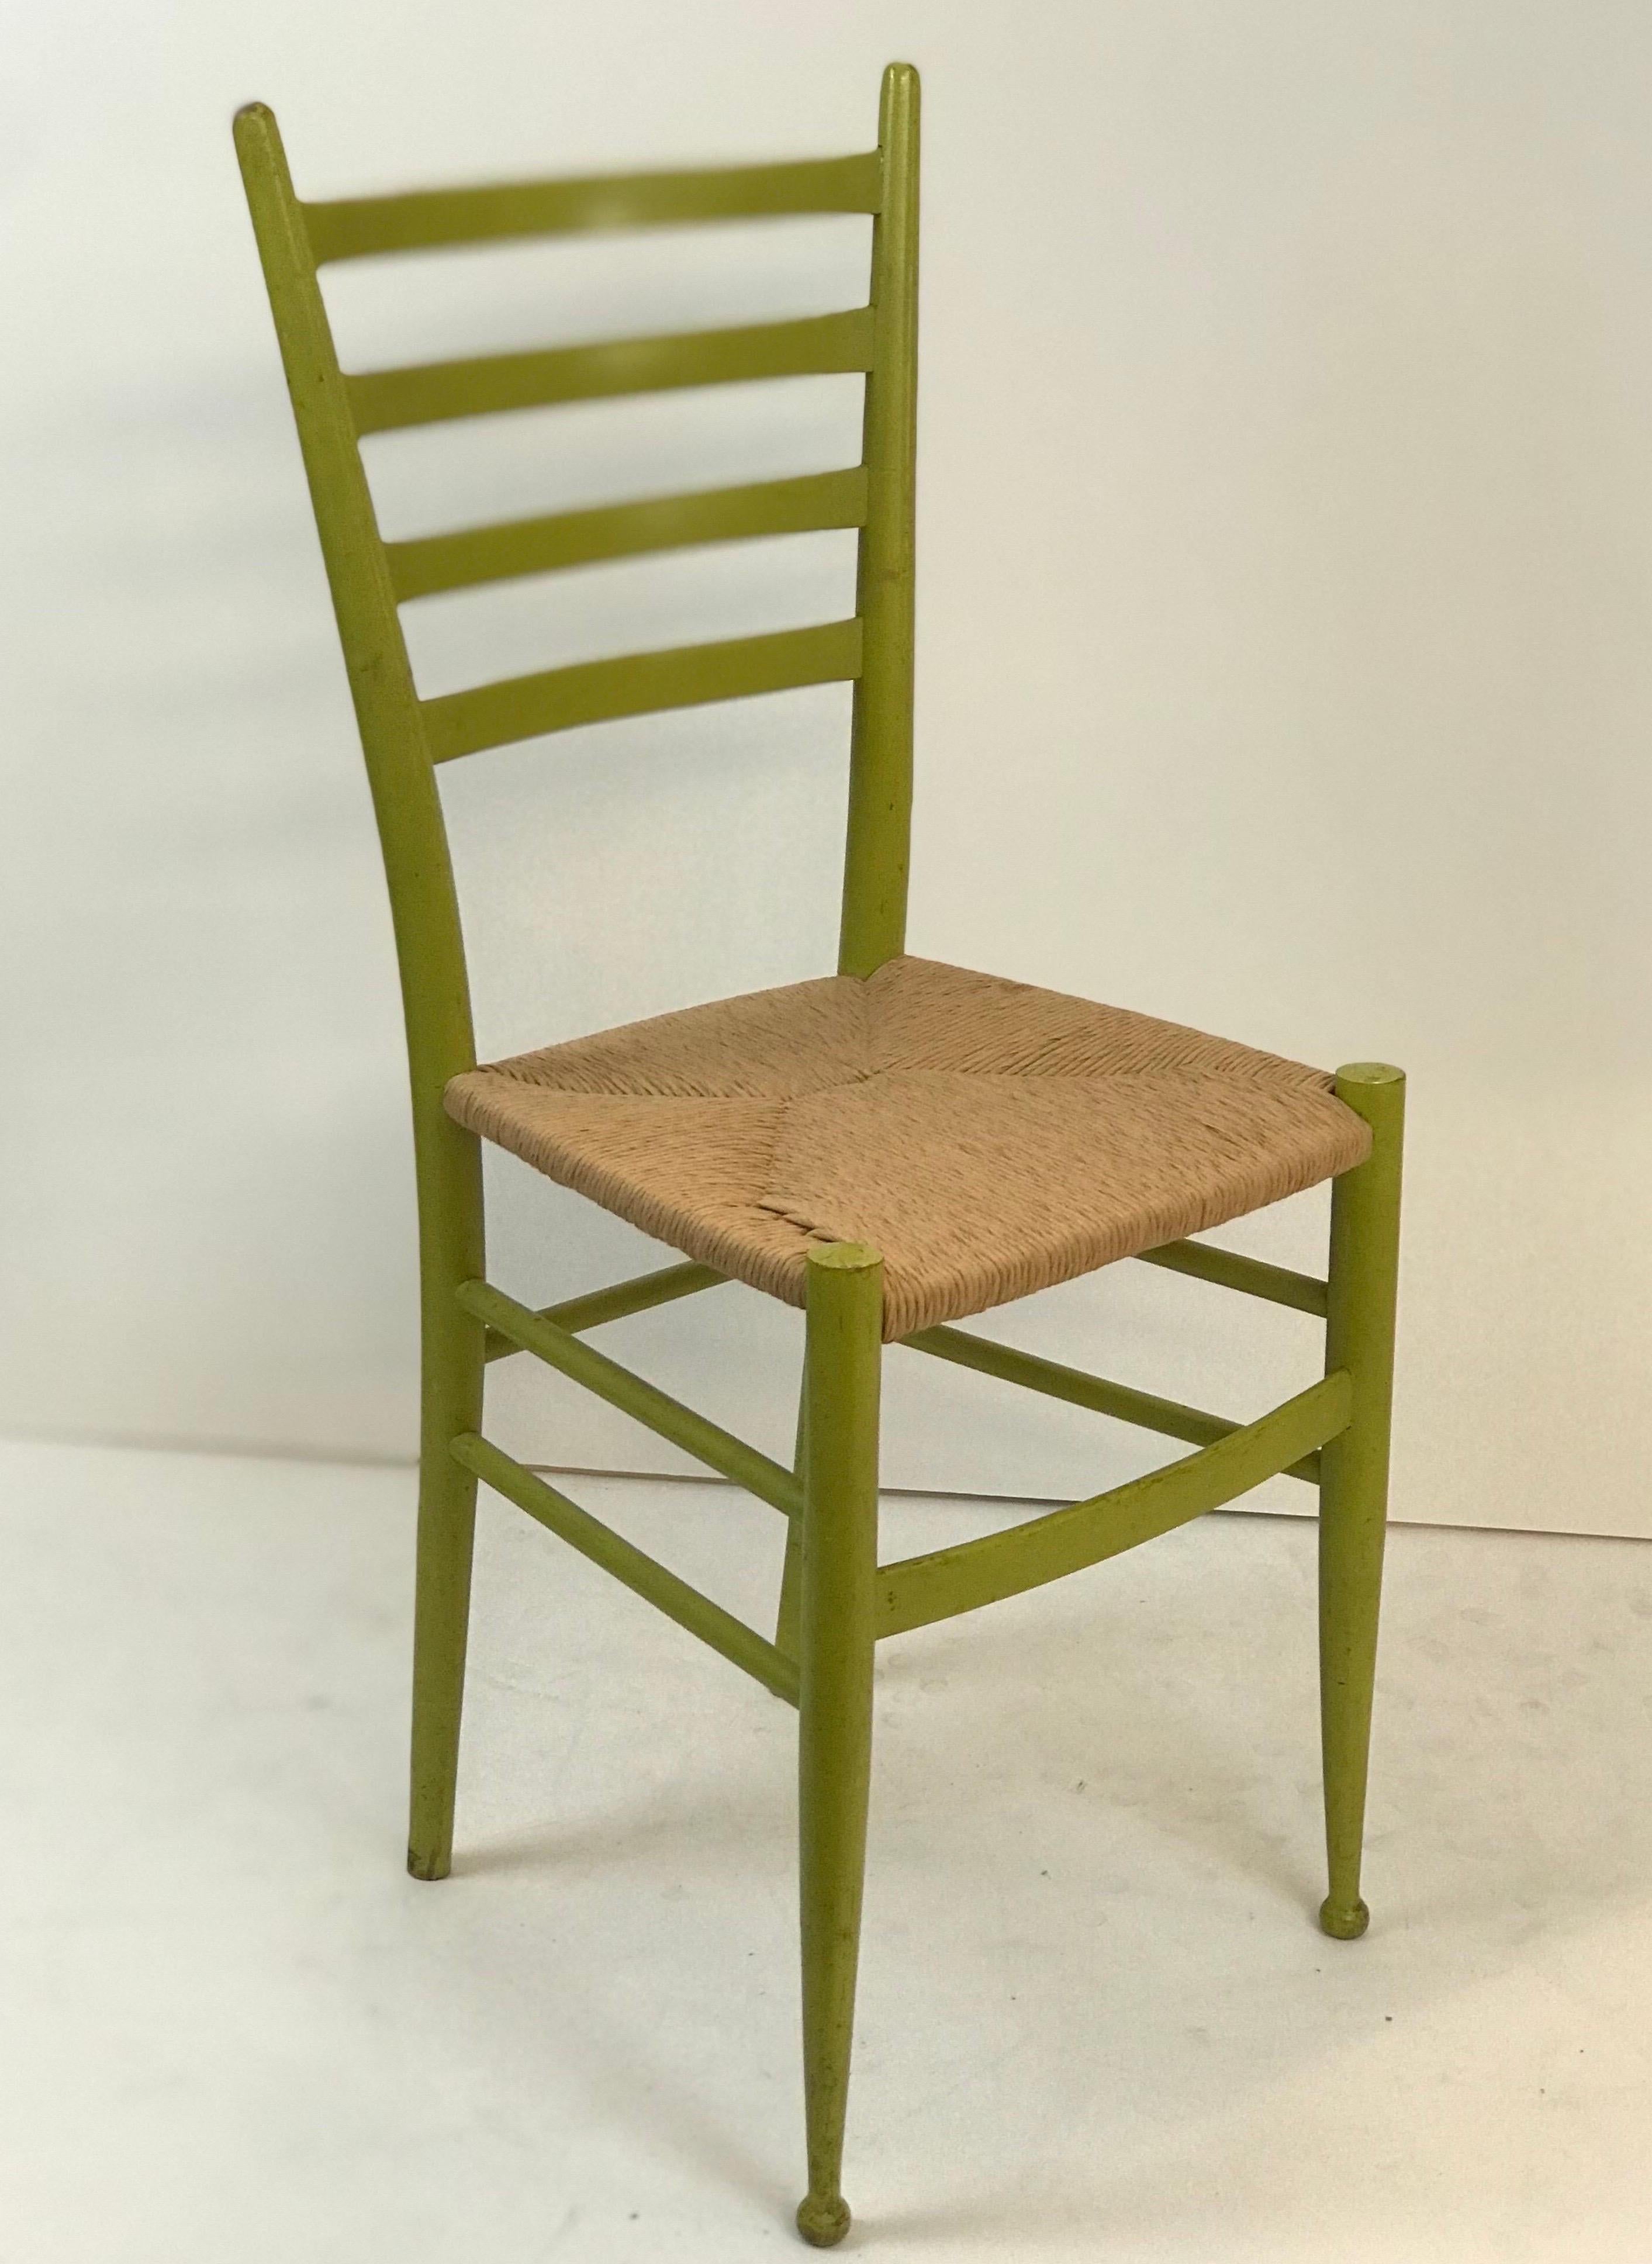 A traditional Spinetto, Italian ladder back chair made by Chiavari with new hemp rope woven seat in of the period green finish. Recently restored and in excellent structural and cosmetic condition. Wood shows signs of age and use but has no serious